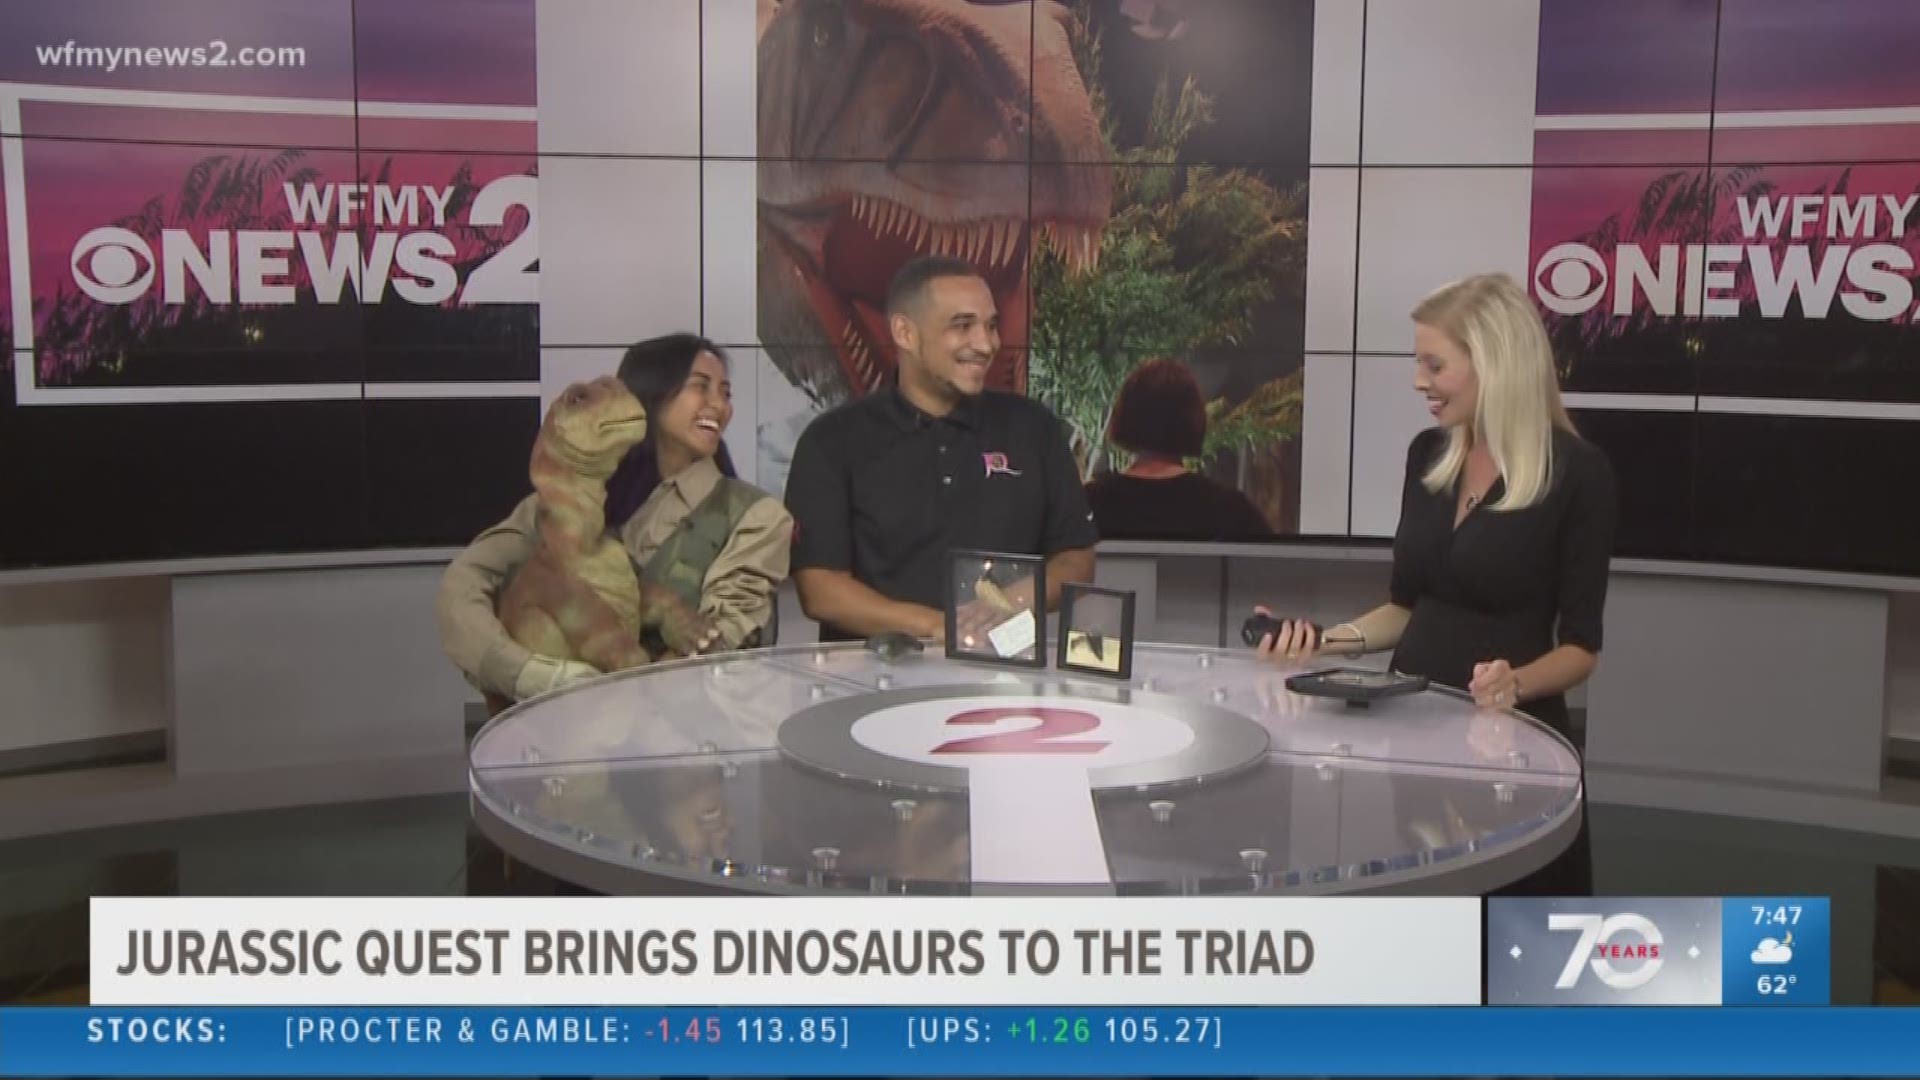 Dinosaurs are invading the Triad as Jurassic Quest sets up shop at the Winston-Salem fairgrounds. It’s the perfect family friendly activity for anyone who knows a dinosaur lover.